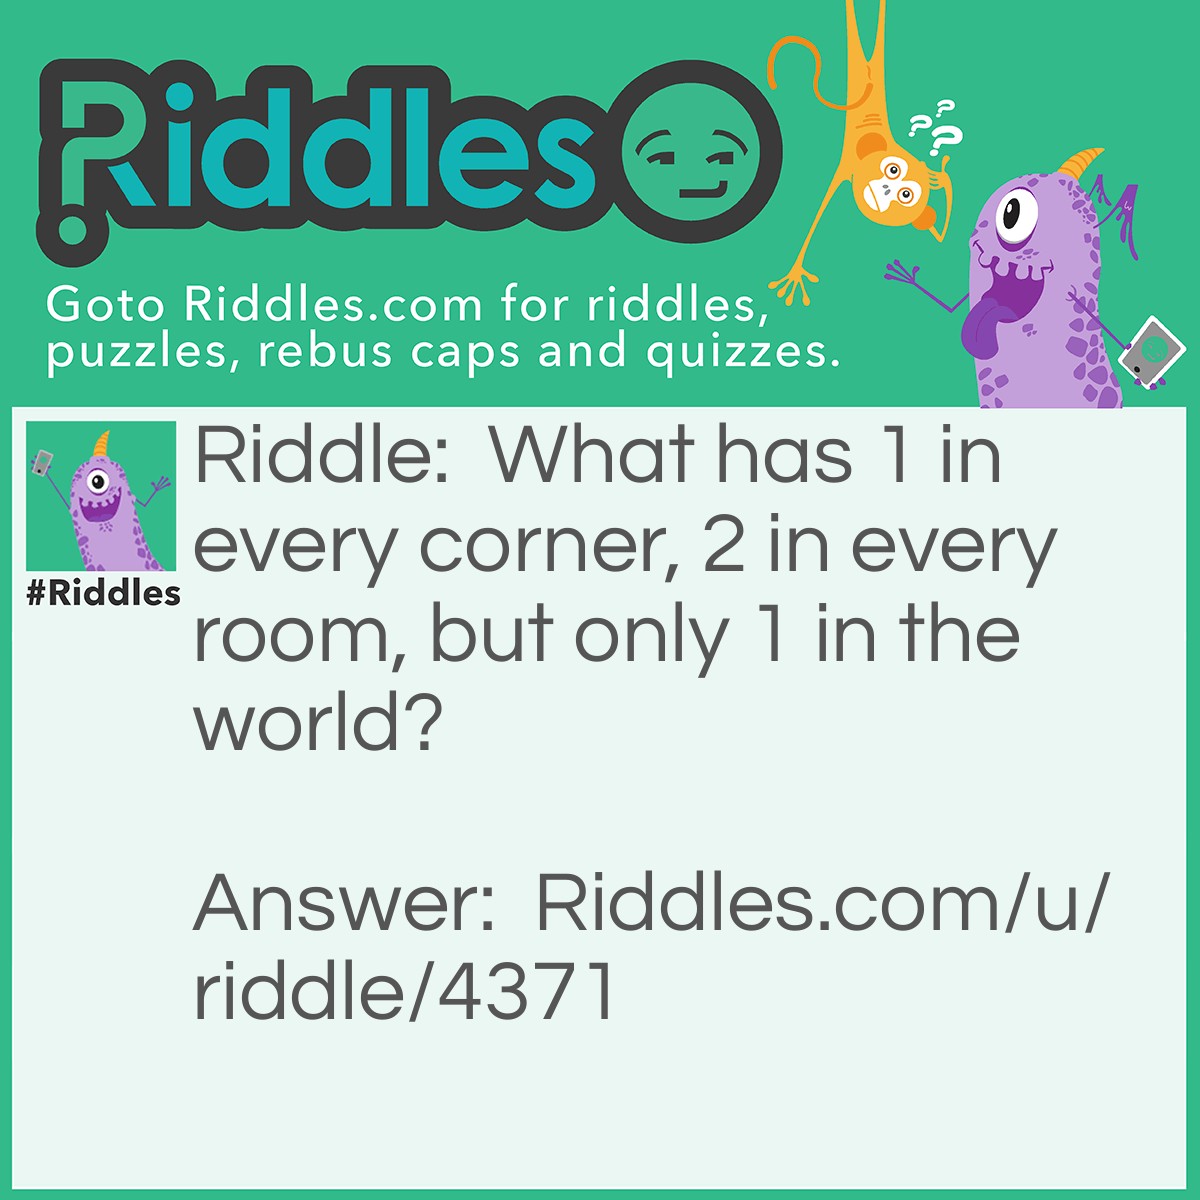 Riddle: What has 1 in every corner, 2 in every room, but only 1 in the world? Answer: The letter O.